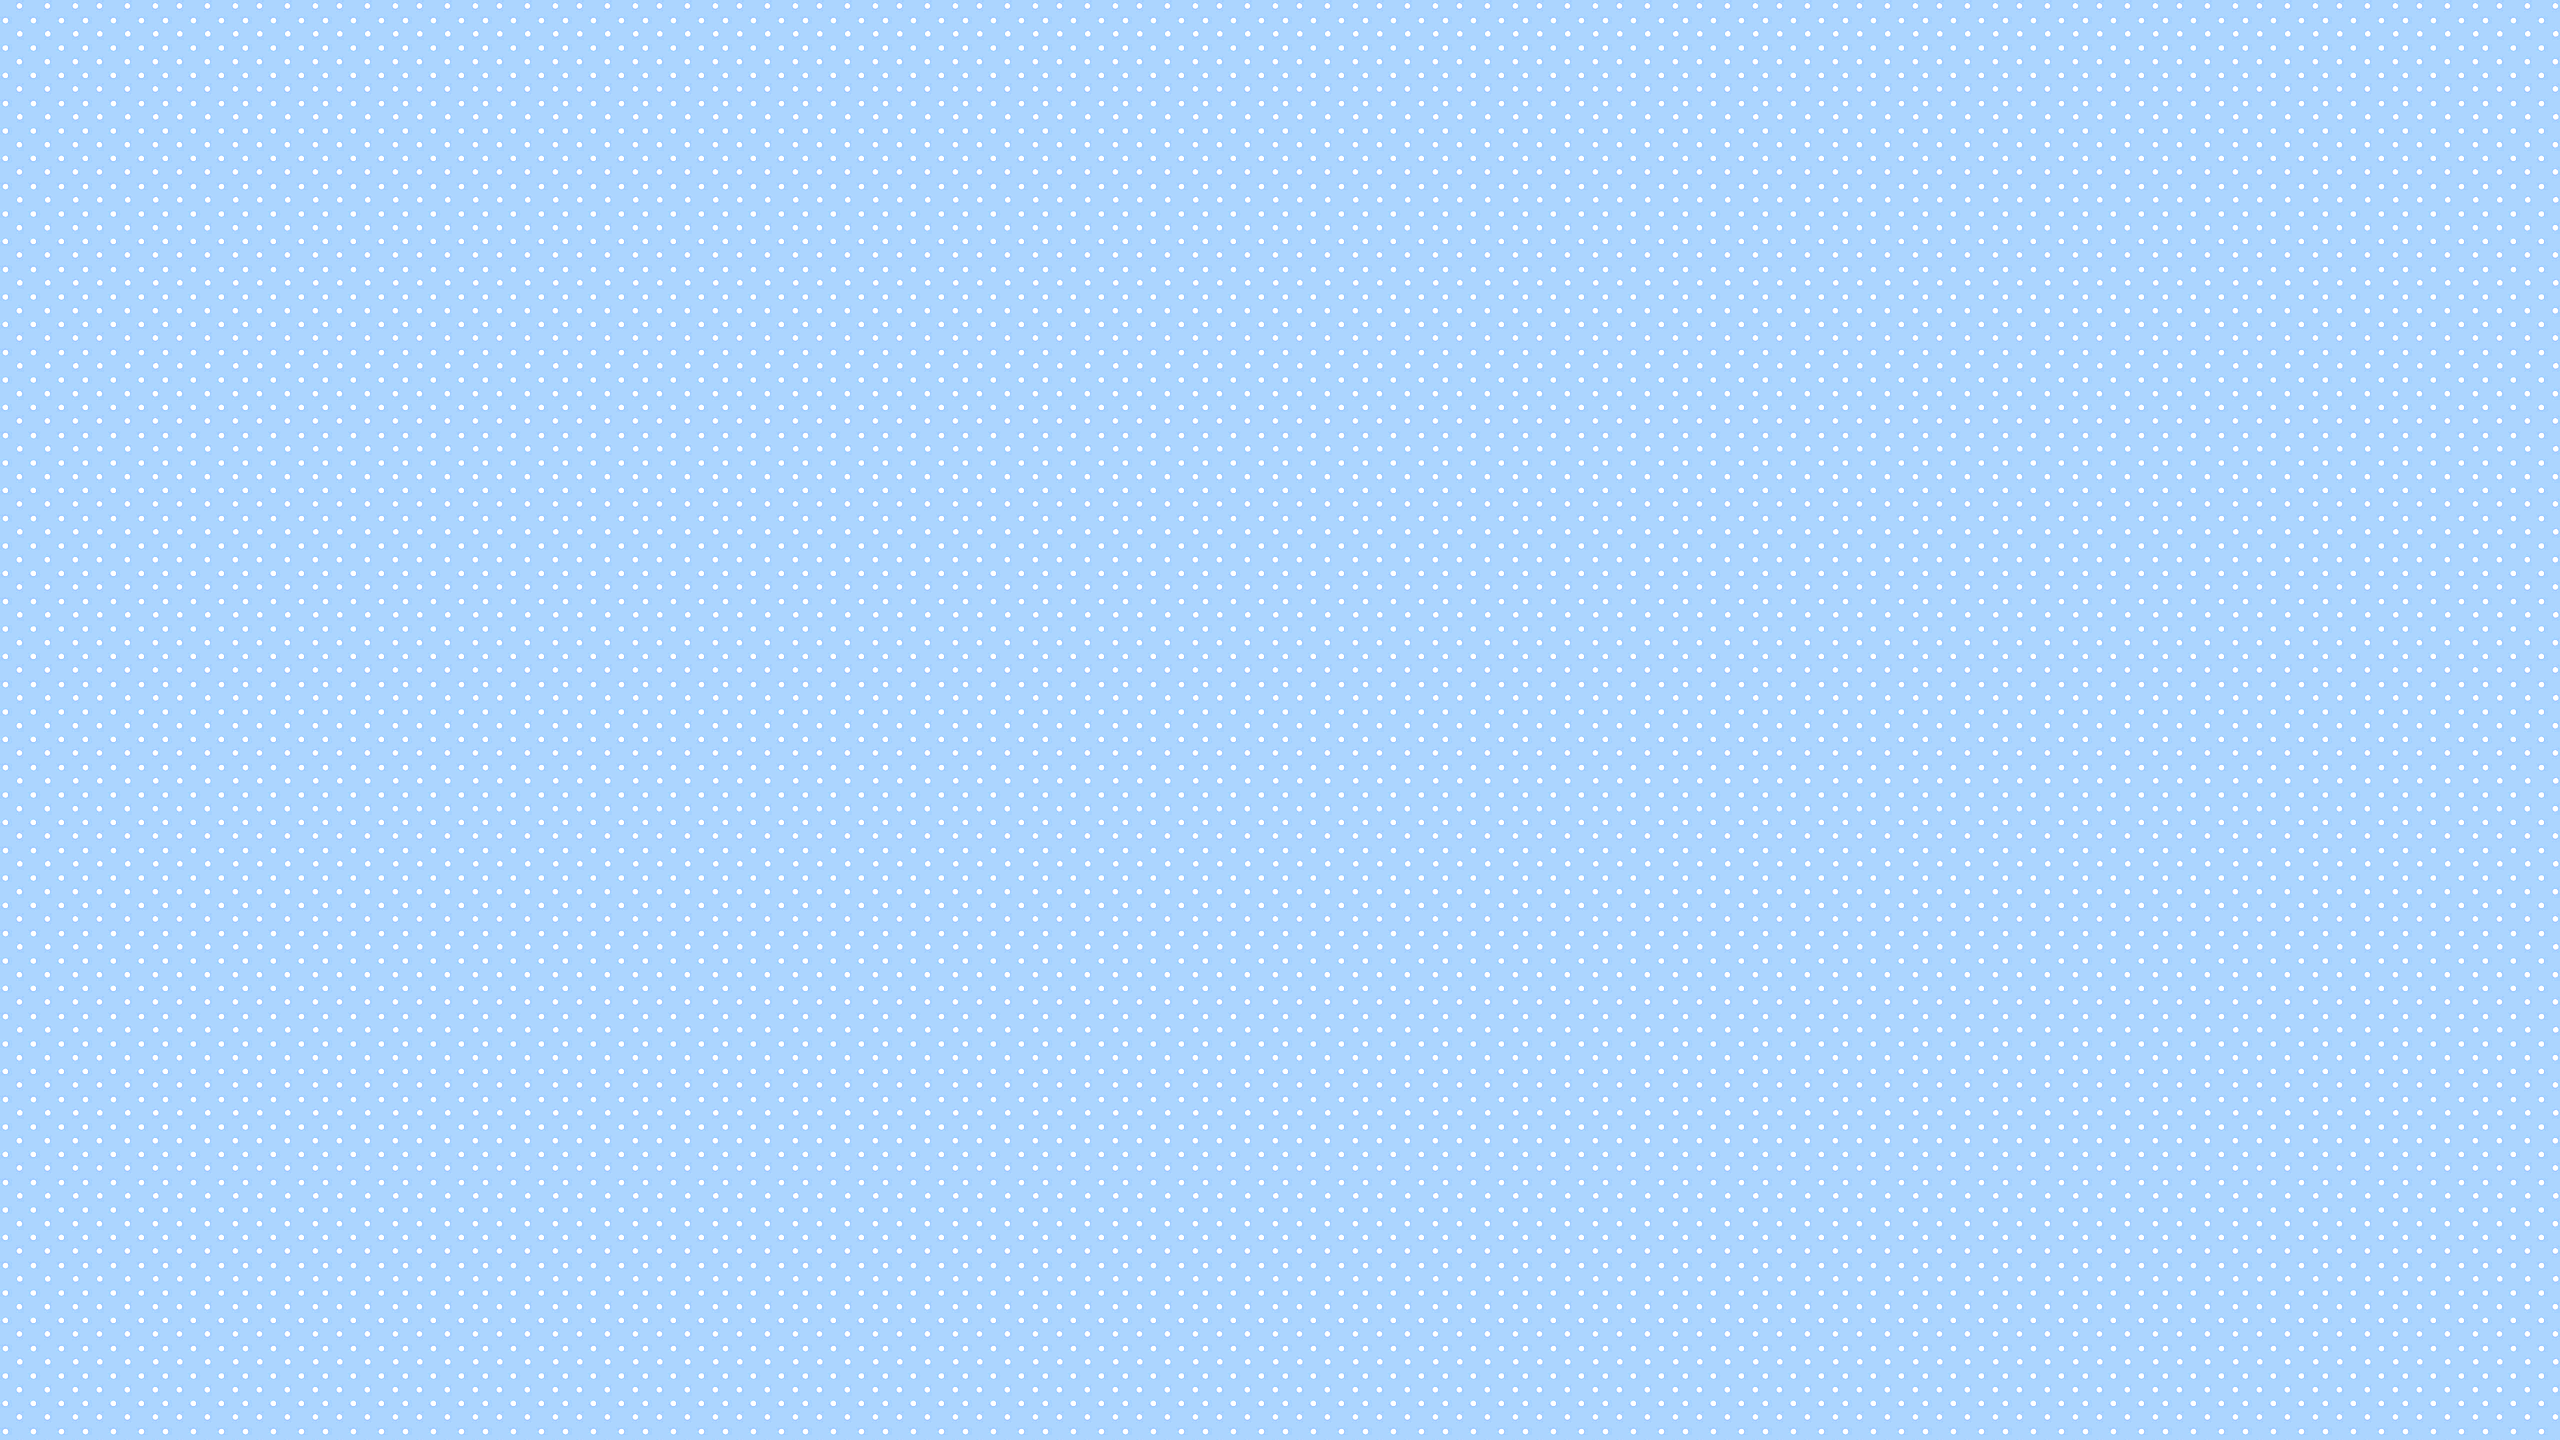 Pastel Blue Dots Desktop Wallpaper Is Easy Just Save The